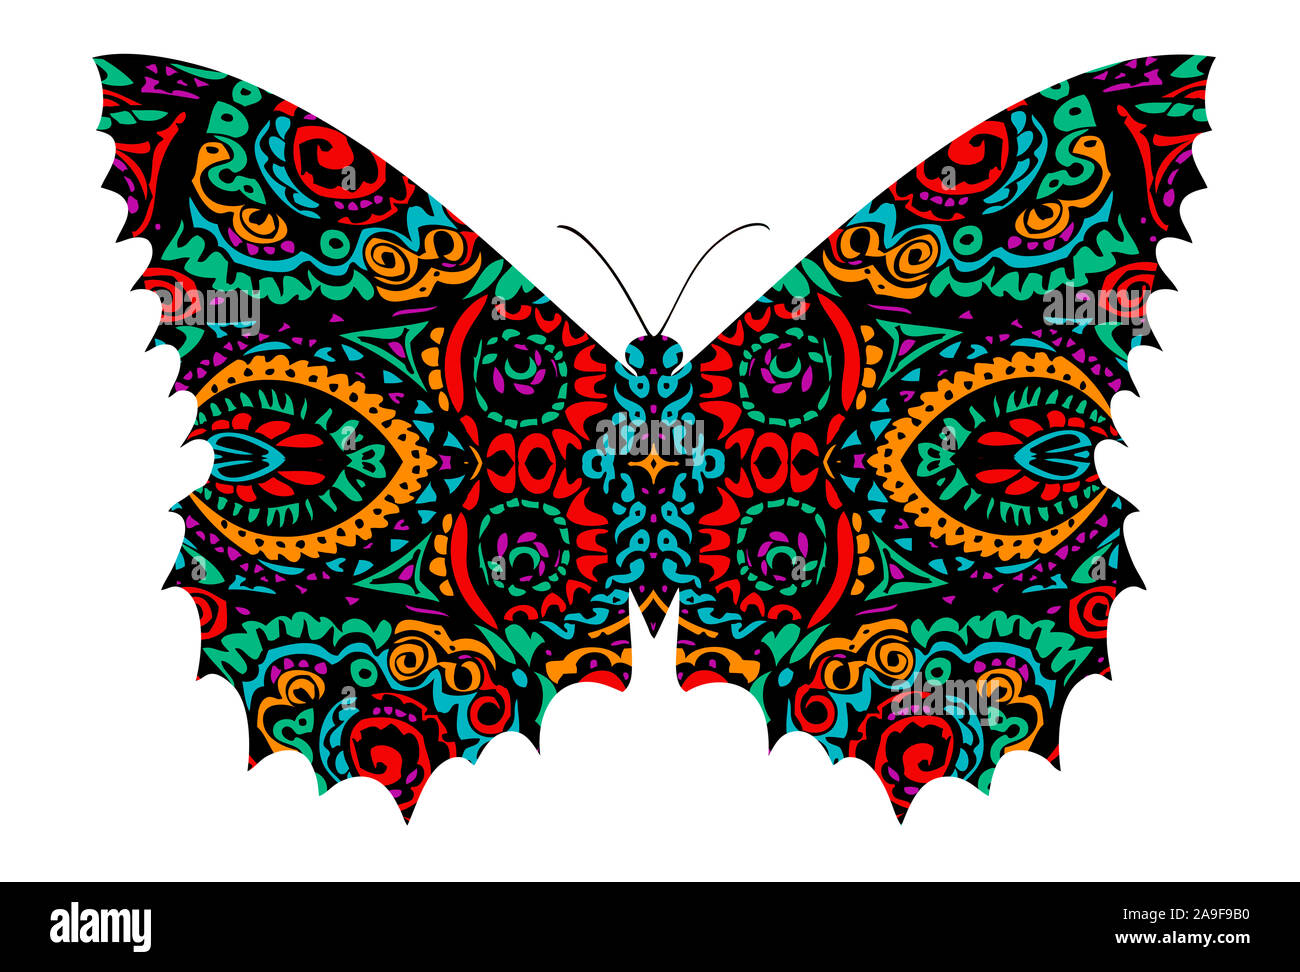 Butterfly, psychedelic design Stock Photo